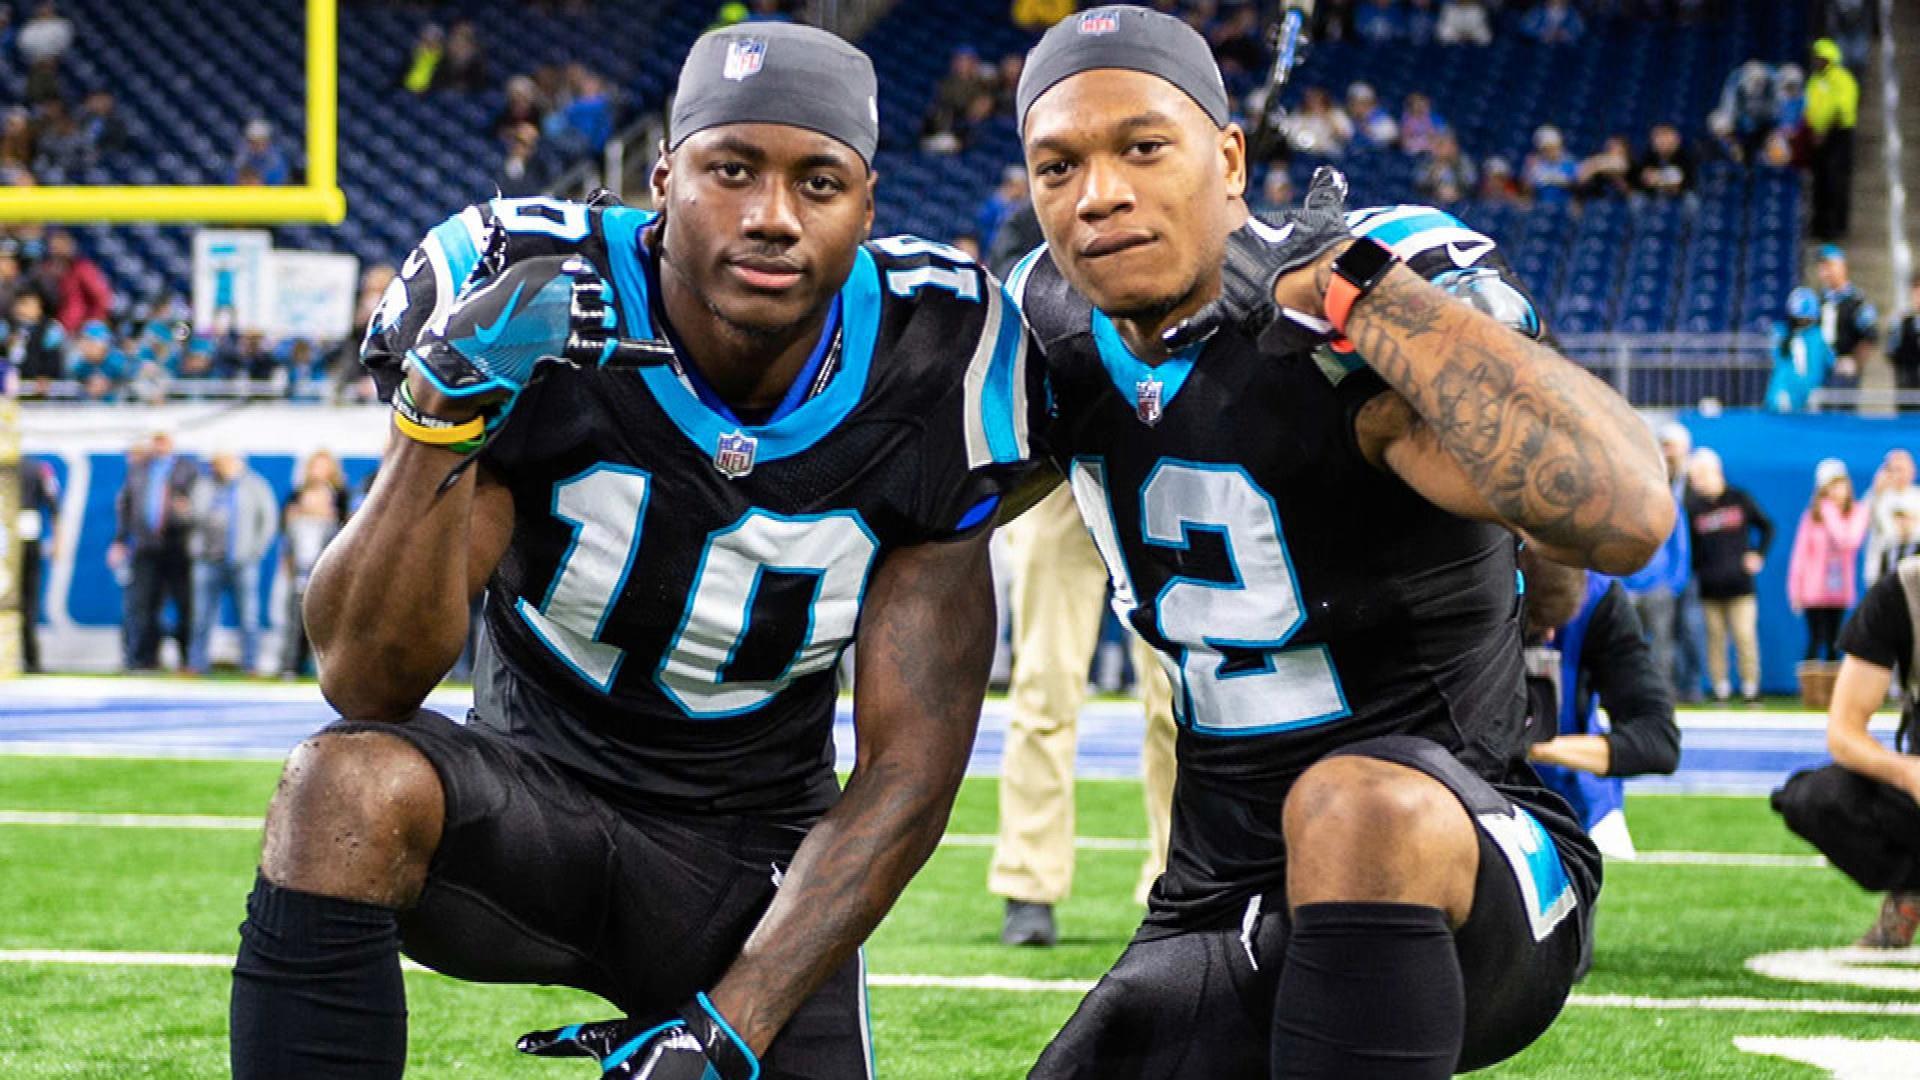 Curtis Samuel and D.J. Moore Fantasy Football Outlook